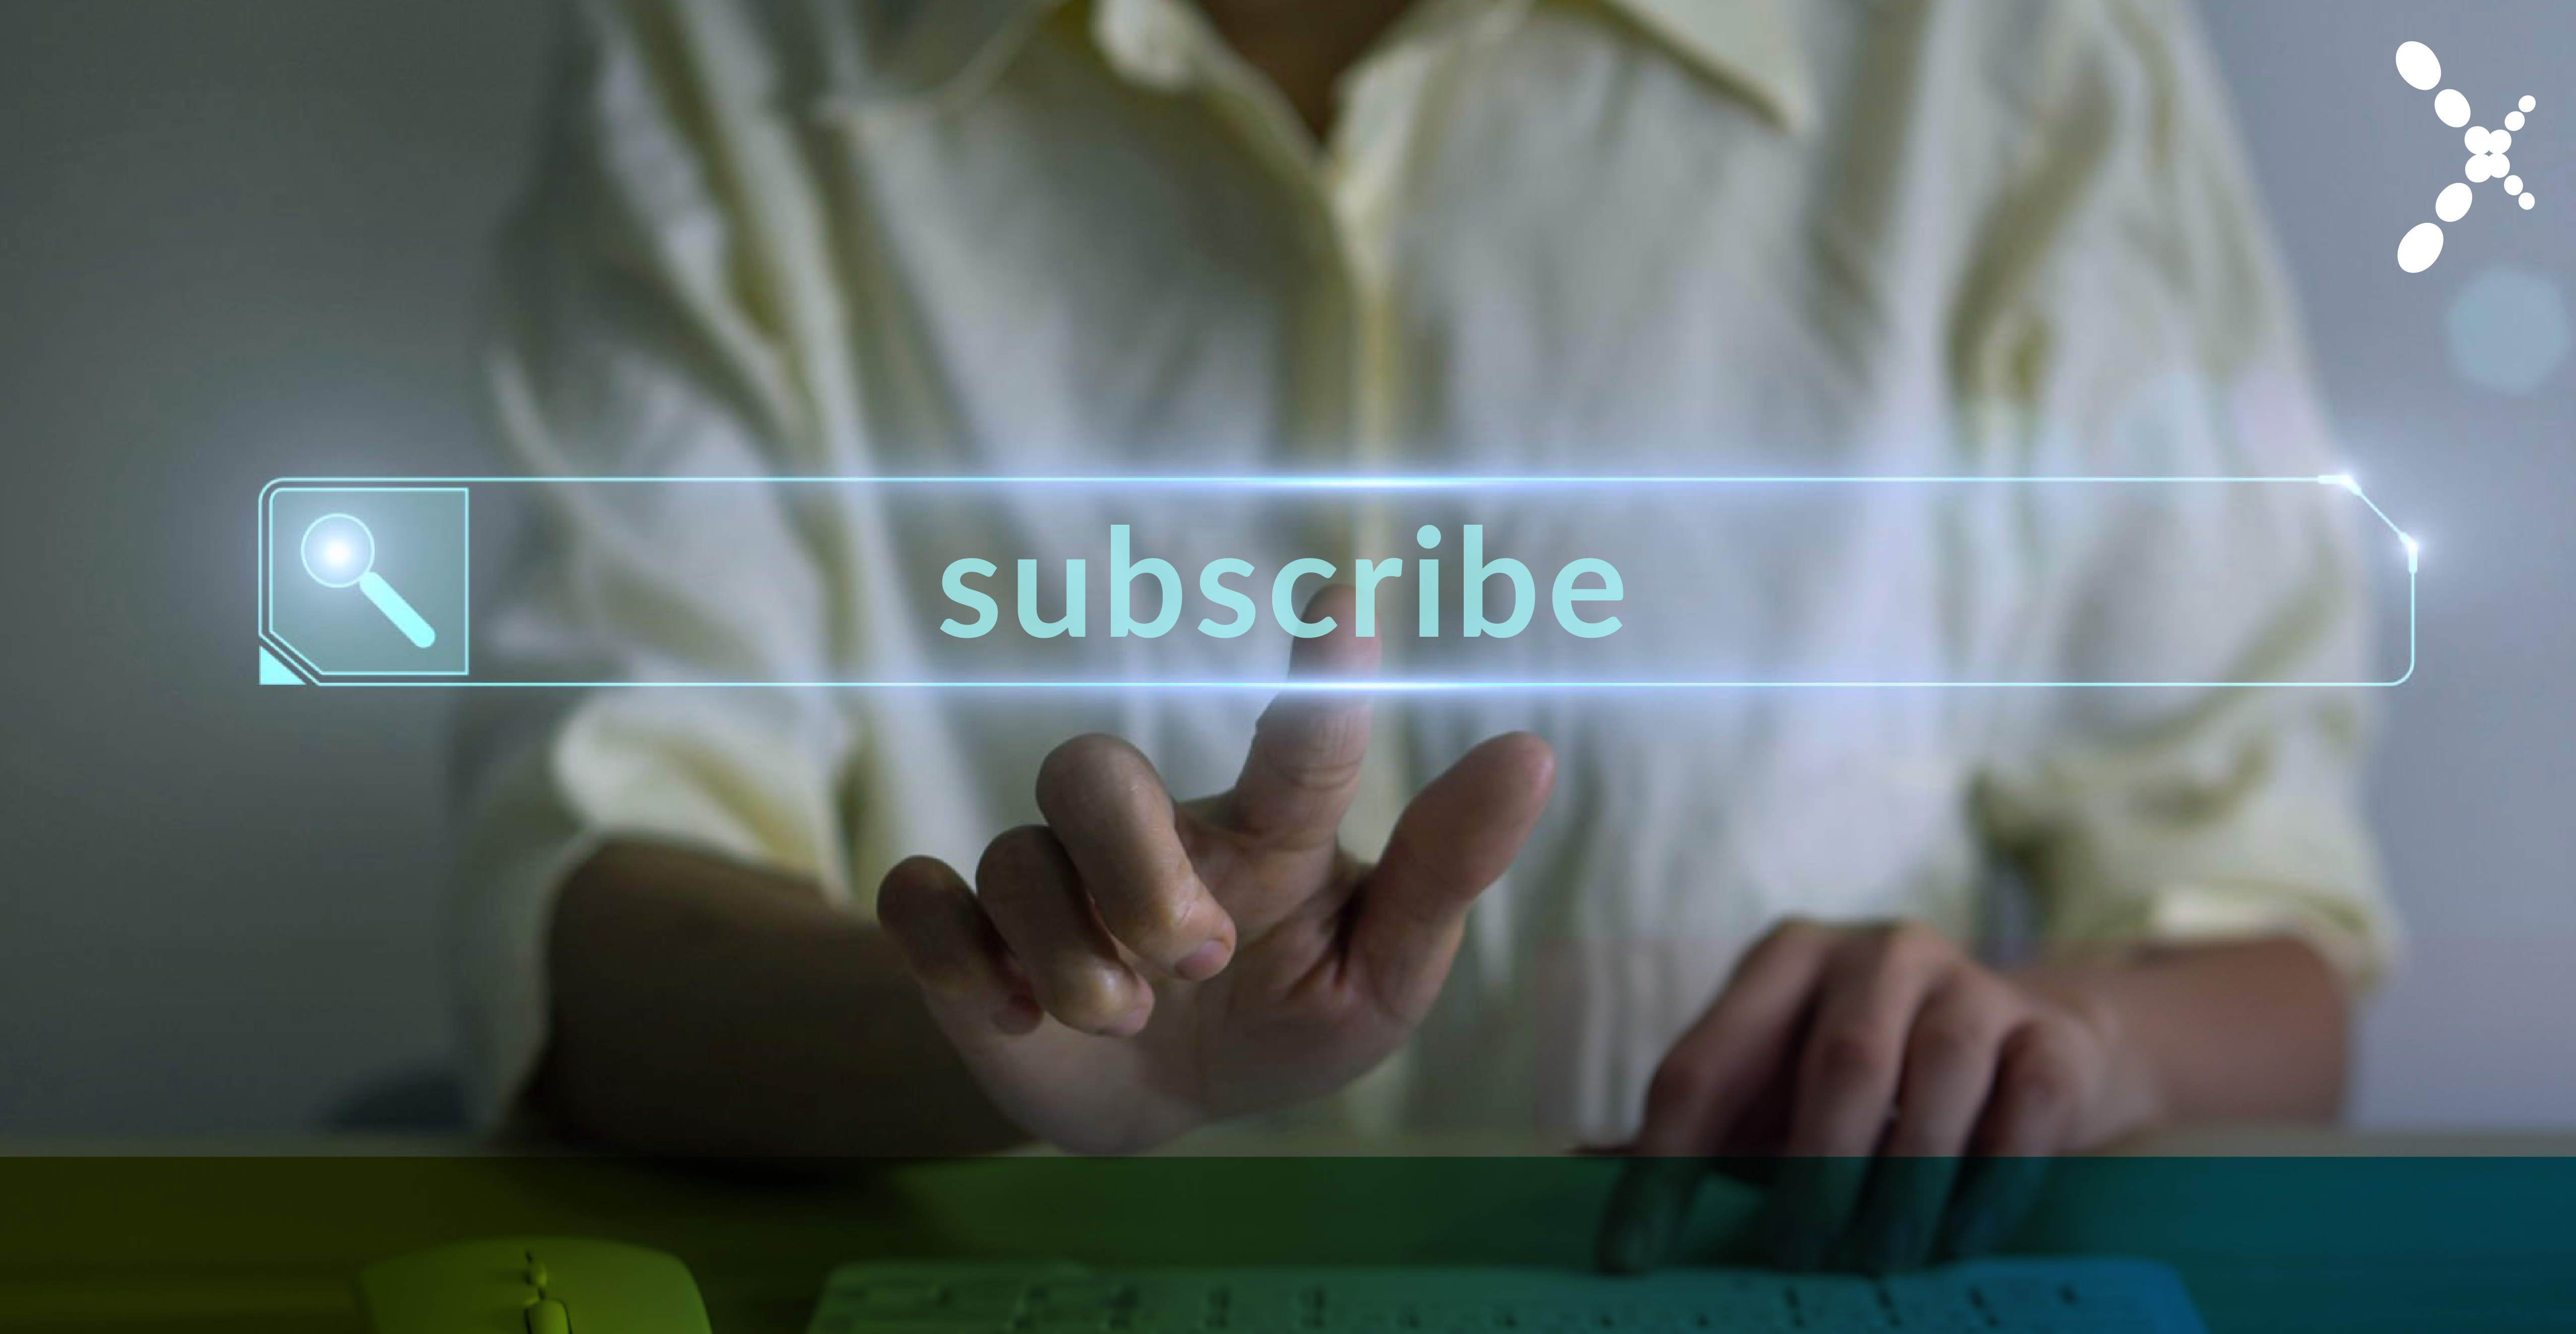 The Key Role of Payment Orchestration in the Subscription Economy